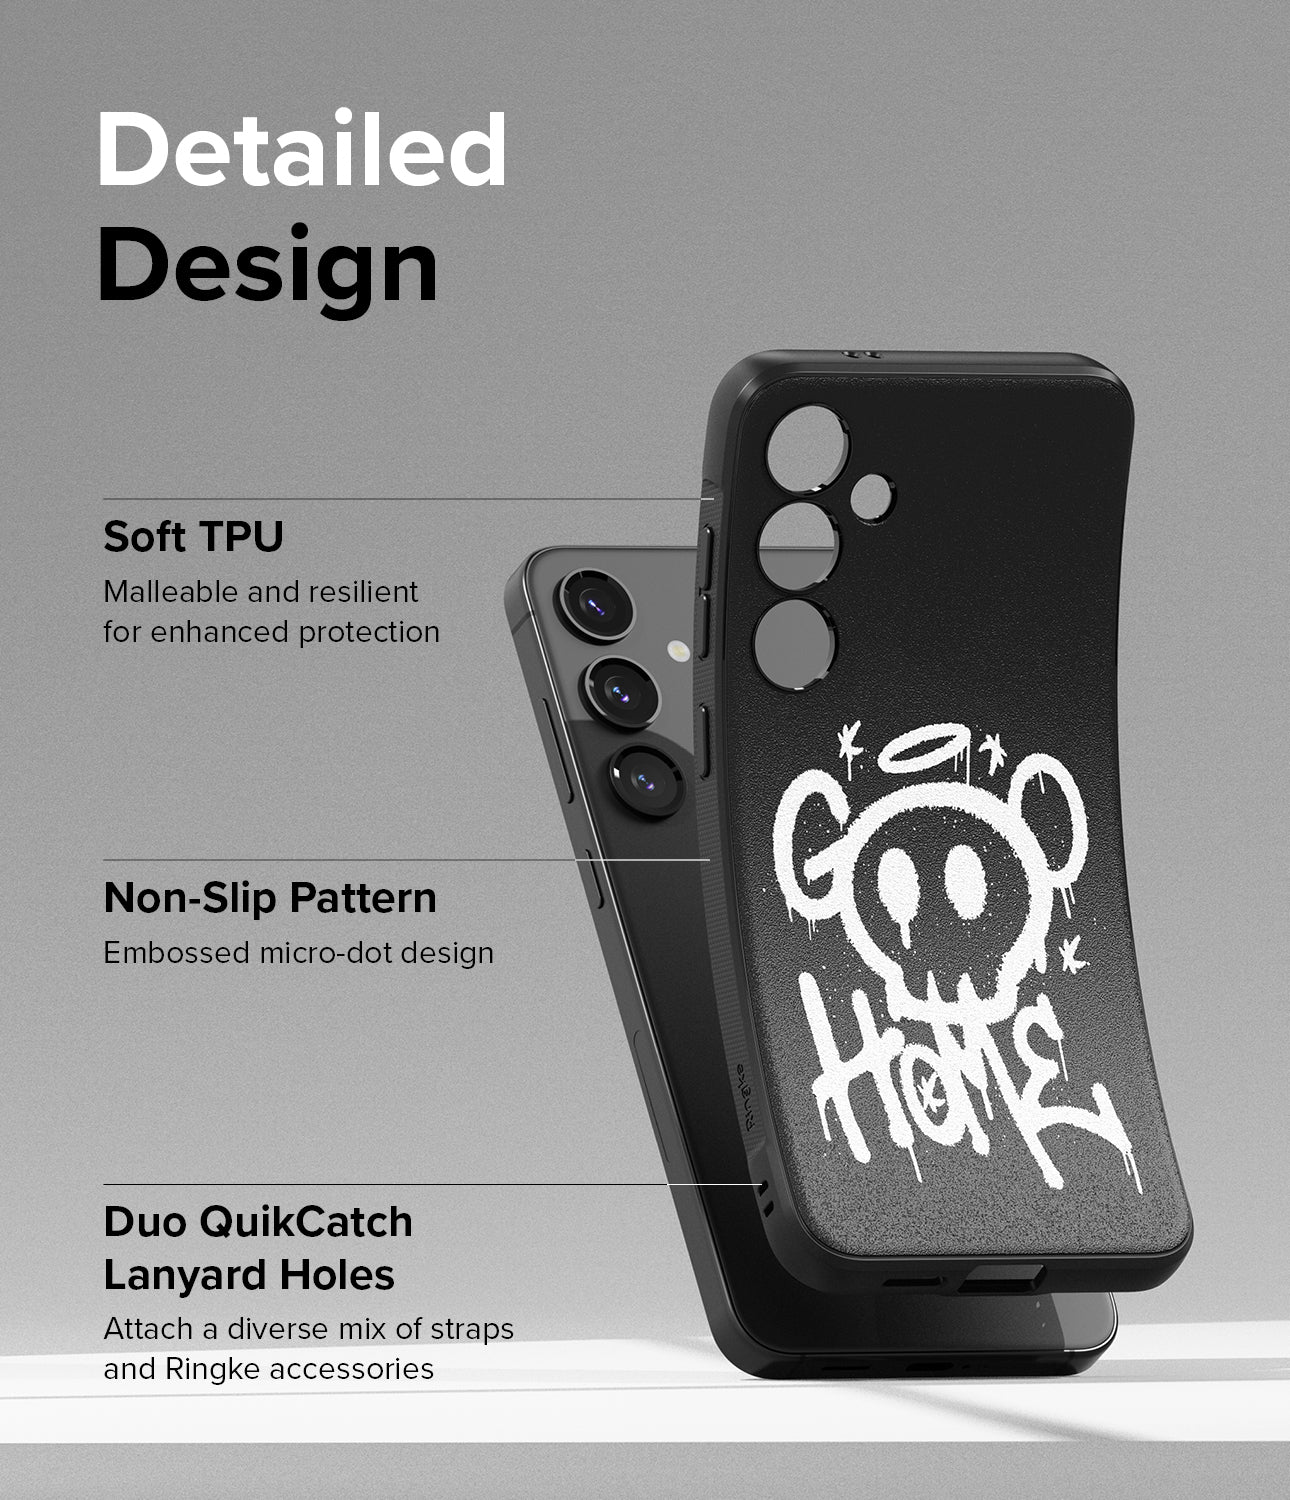 Galaxy S24 Plus Case | Onyx Design - Graffiti 2 - Detailed Design. Malleable and resilient for enhanced protection with Soft TPU. Embossed micro-dot design with non-slip pattern. Attach a diverse mix of straps and Ringke accessories with Duo QuikCatch Lanyard Holes.